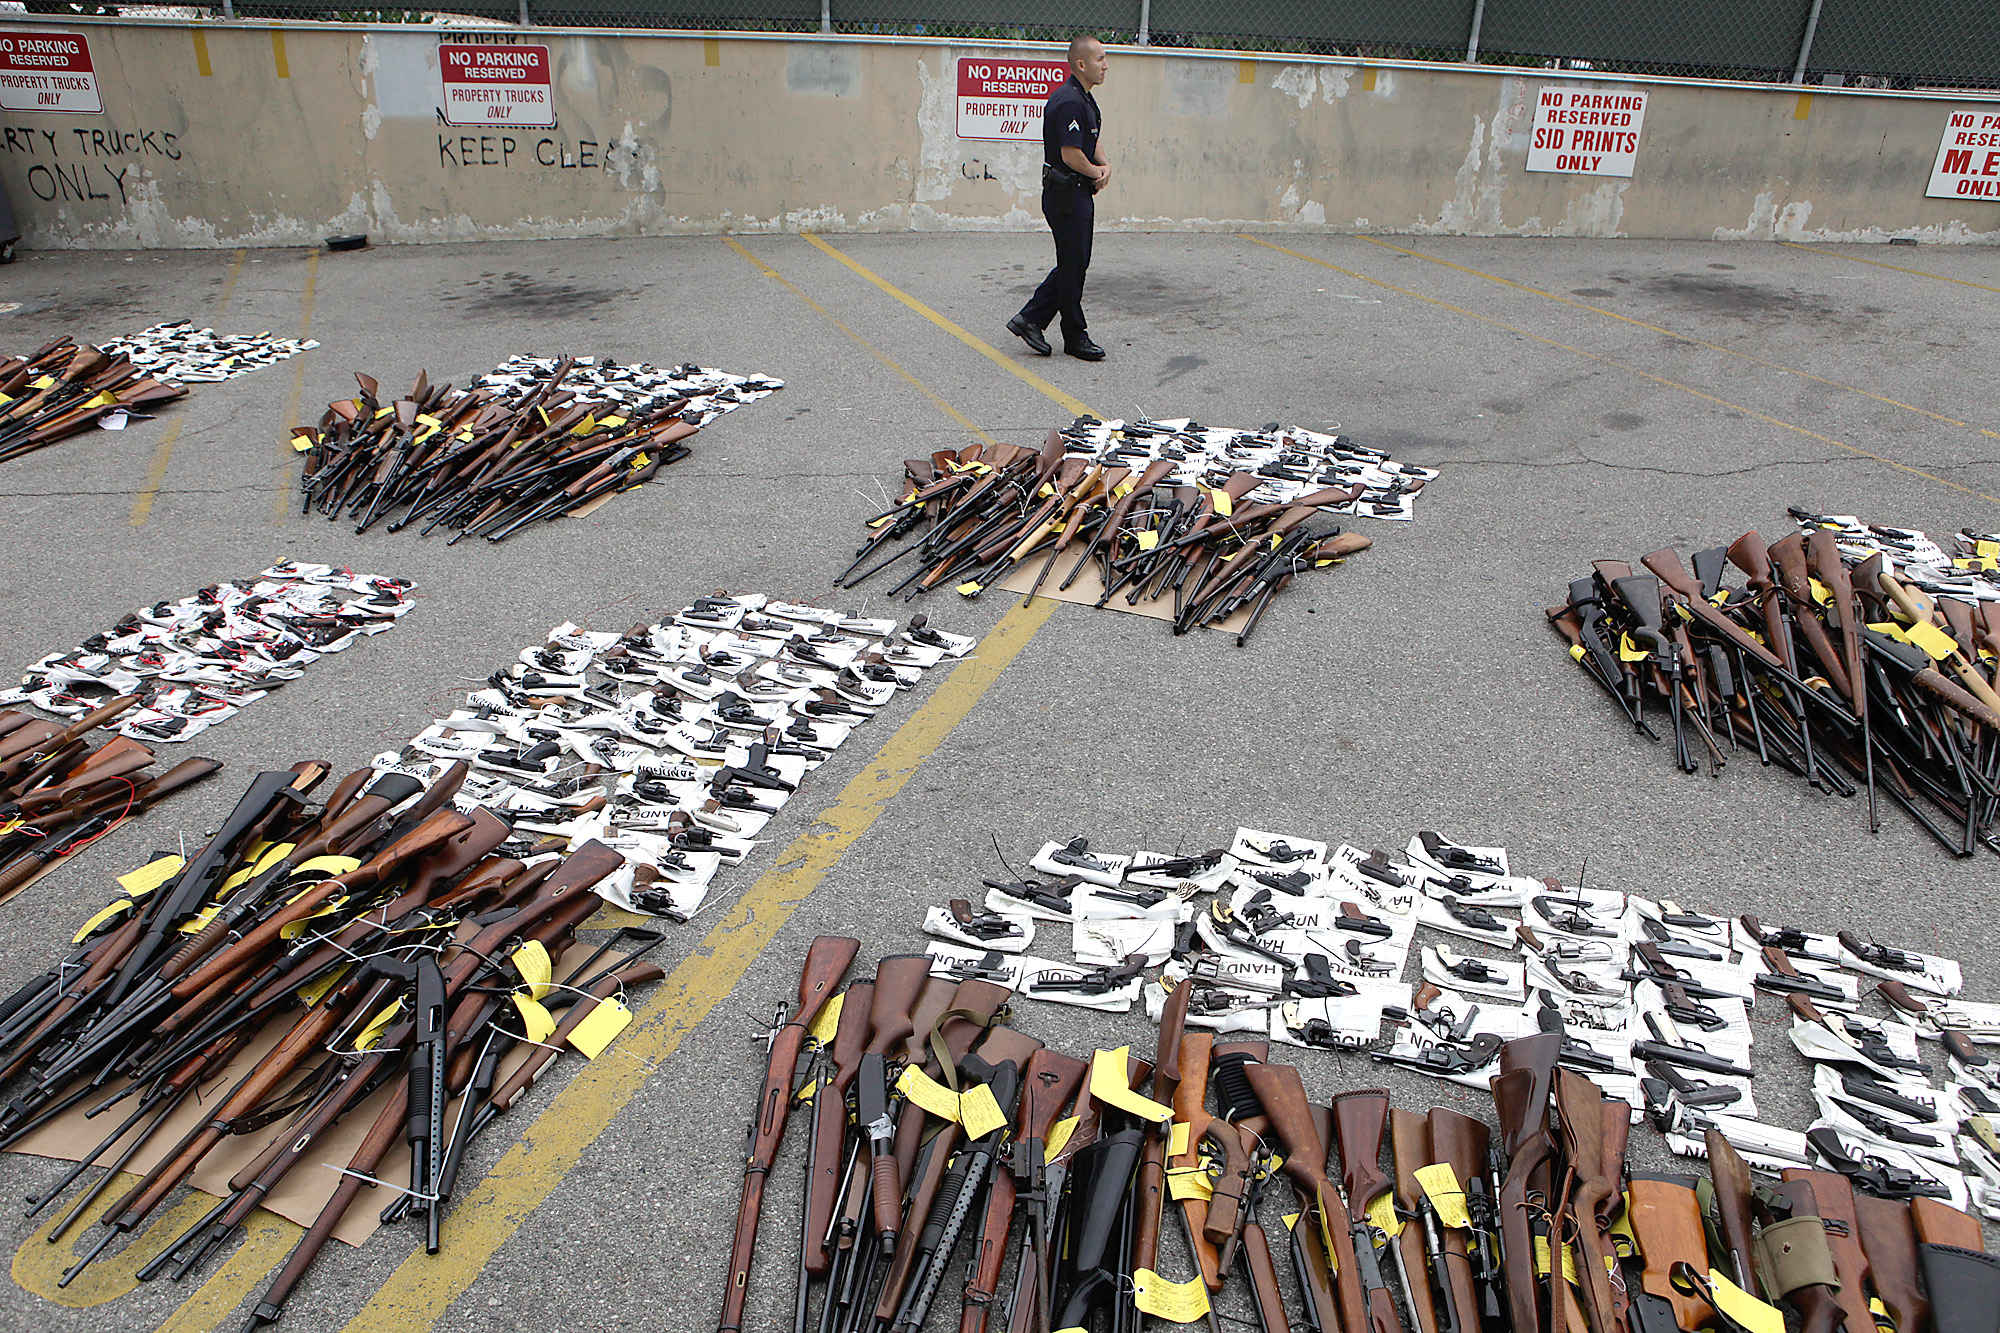 LAPD officer Manuel Ramirez stands guard near some of the nearly 1700 weapons turned over the weeke